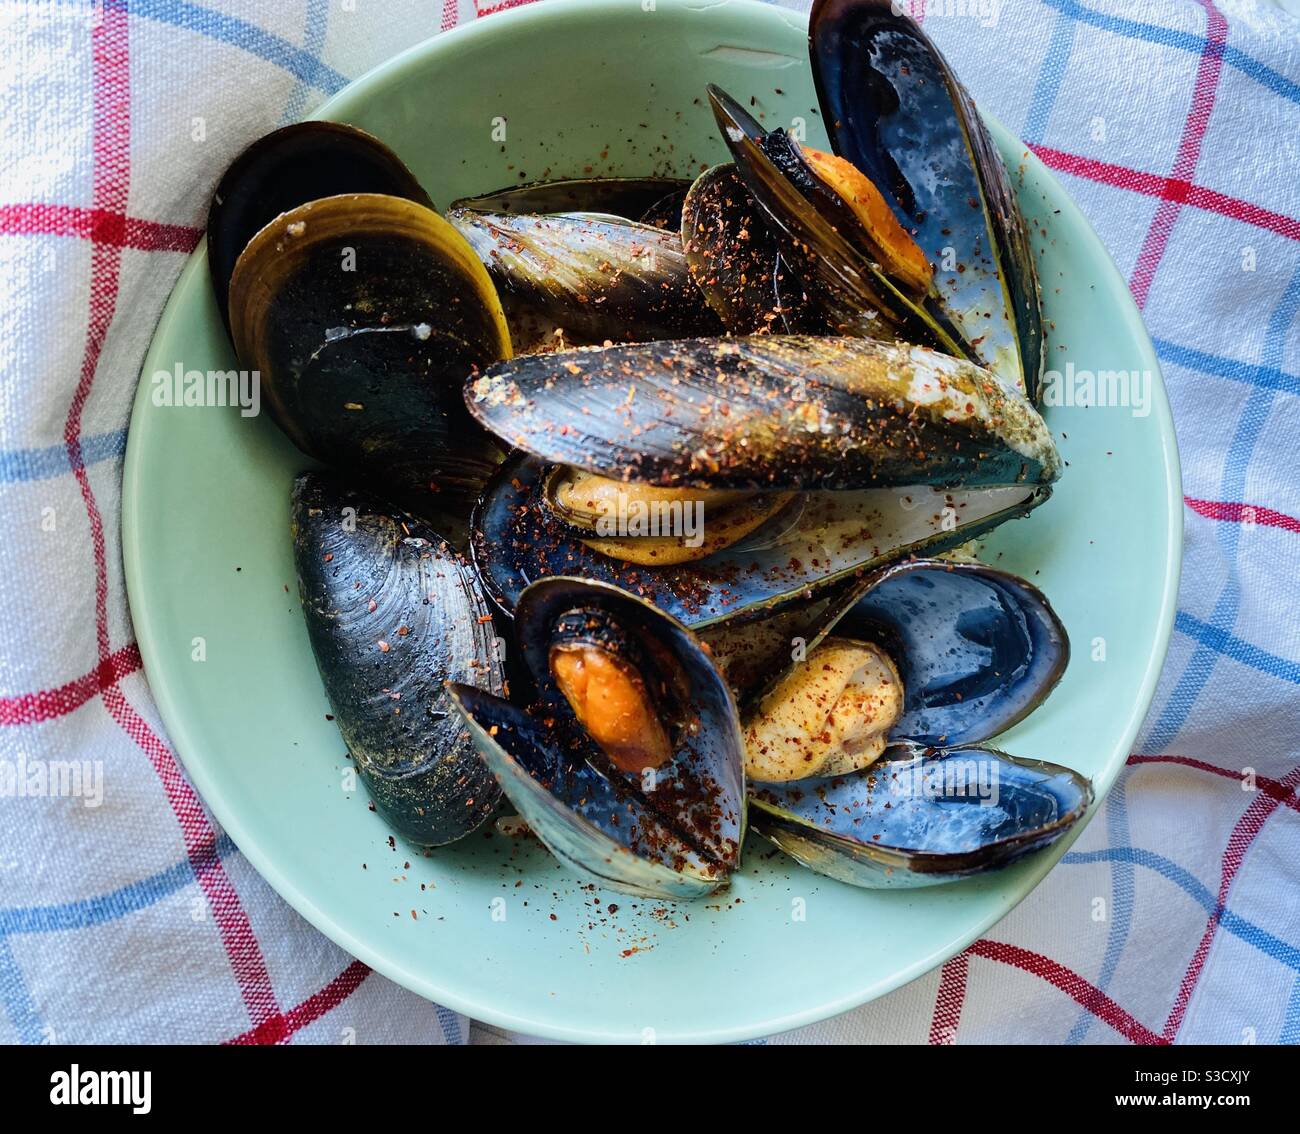 Mussels on rice in a green bowl Stock Photo